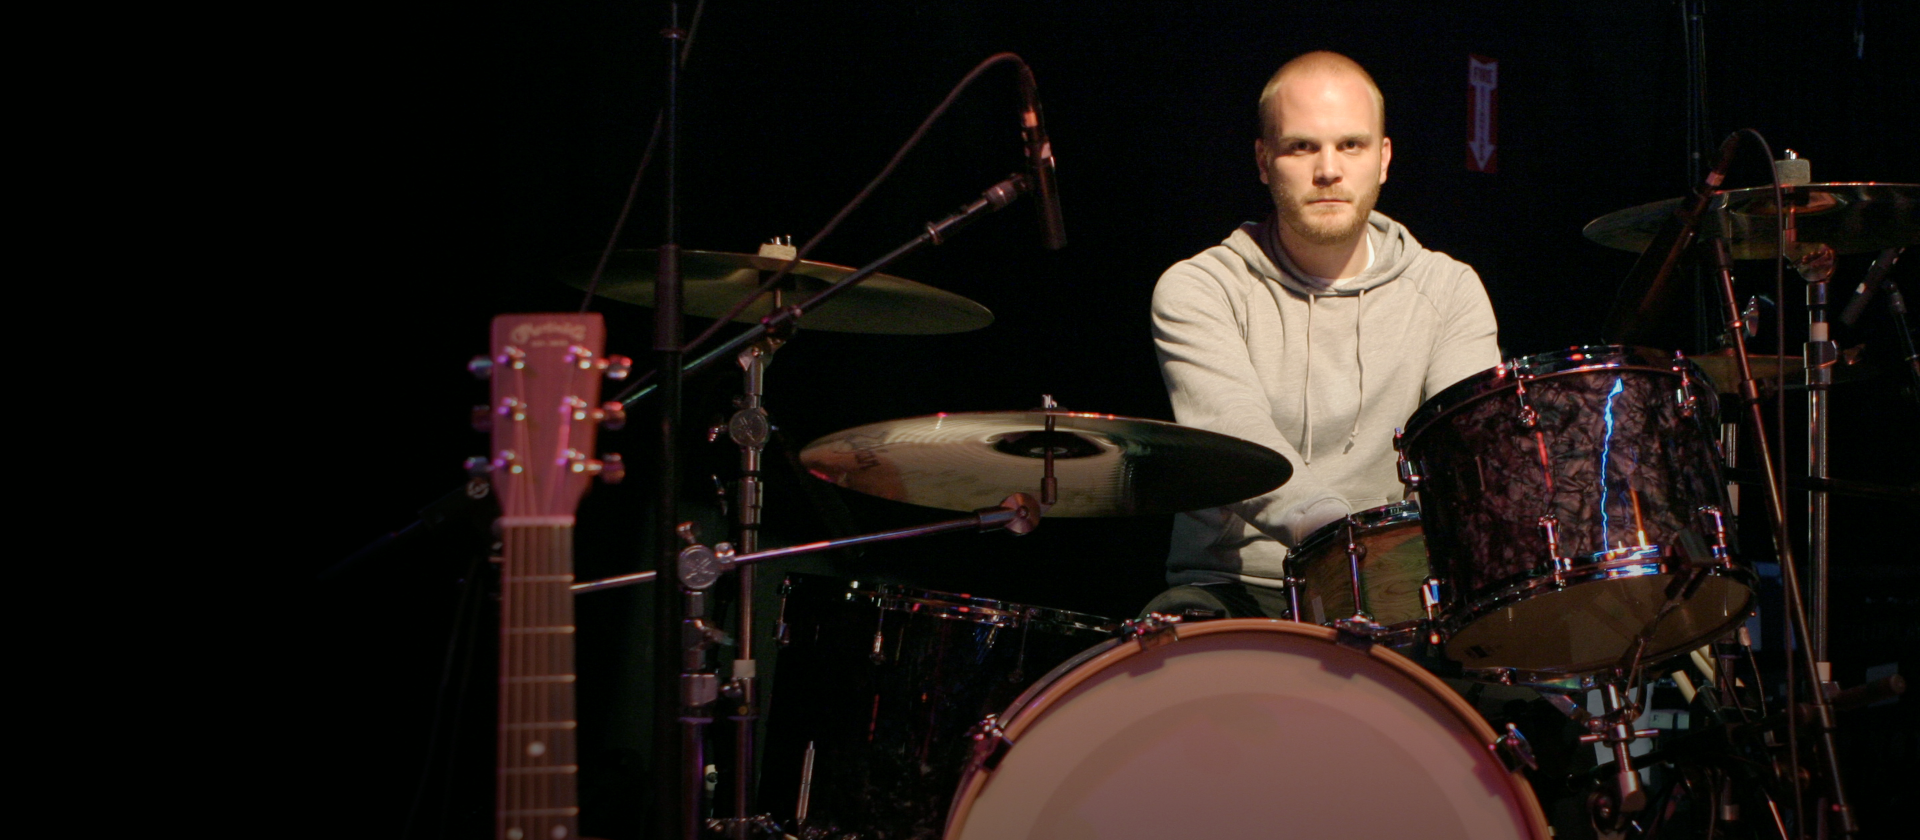 All the drummers: Will Champion